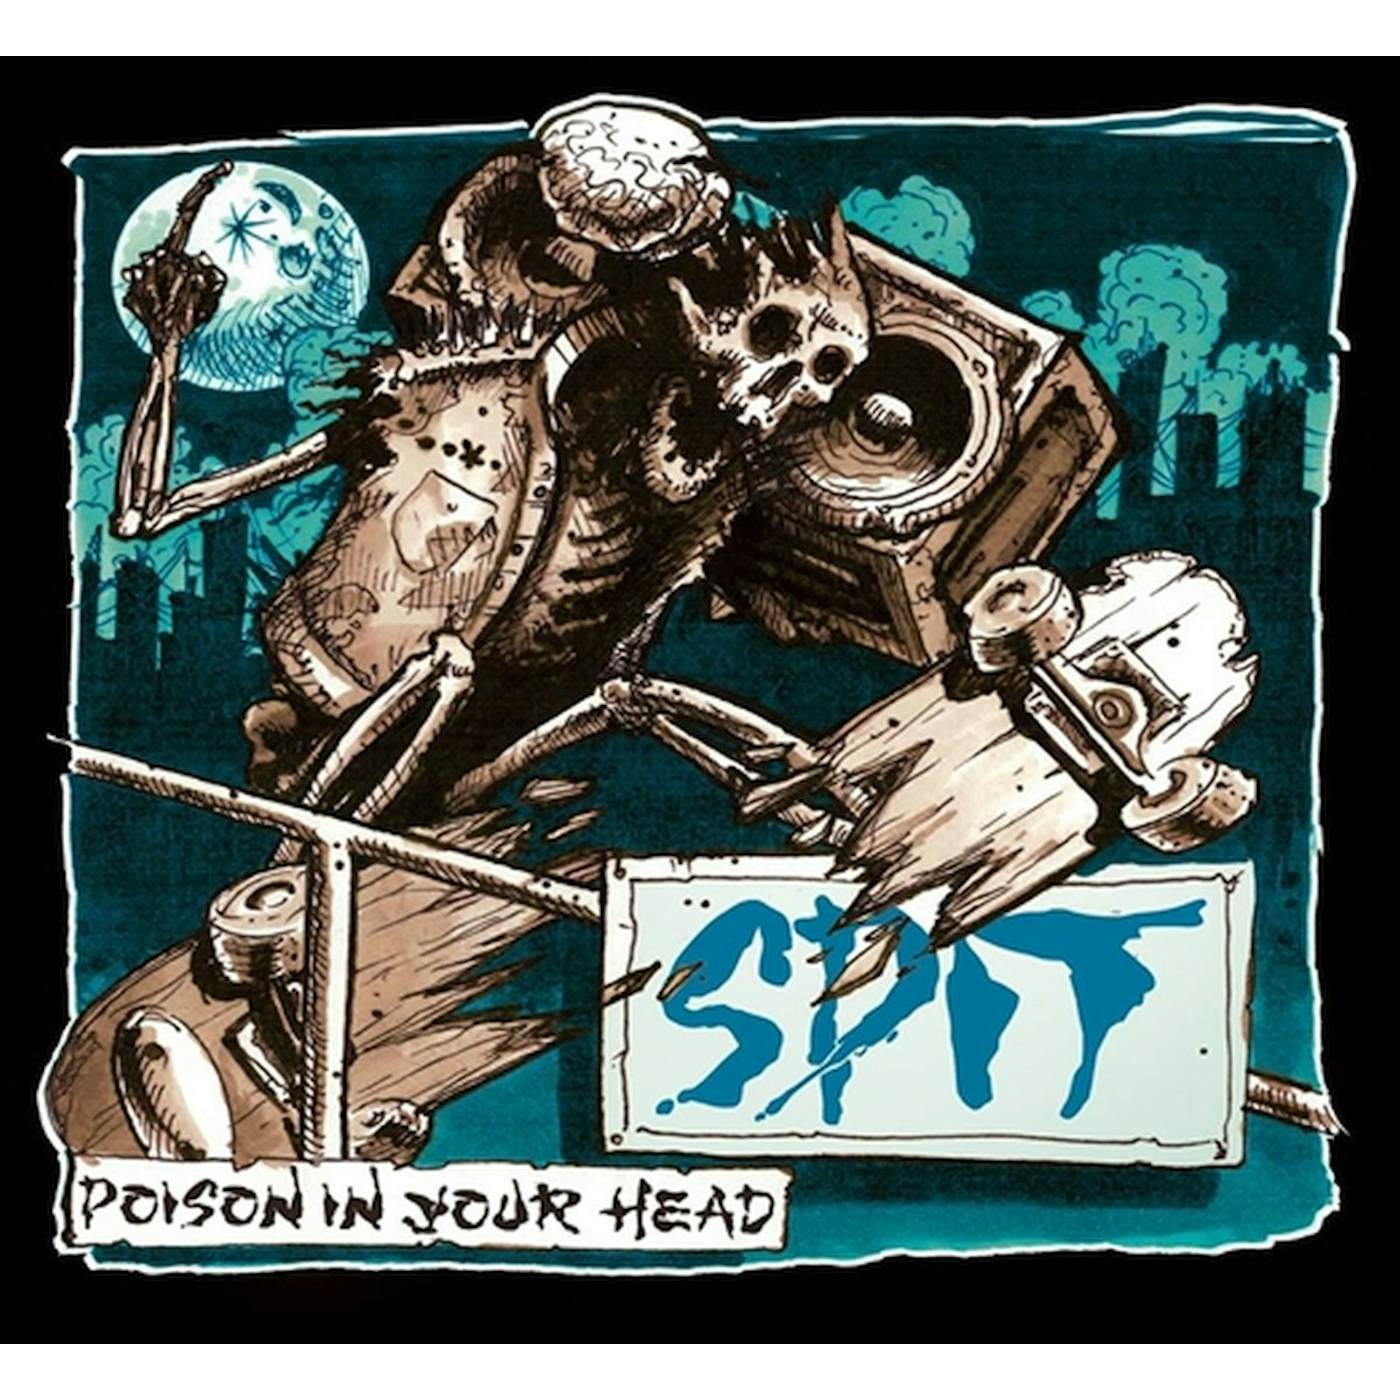 Spit Poison in Your Head Vinyl Record